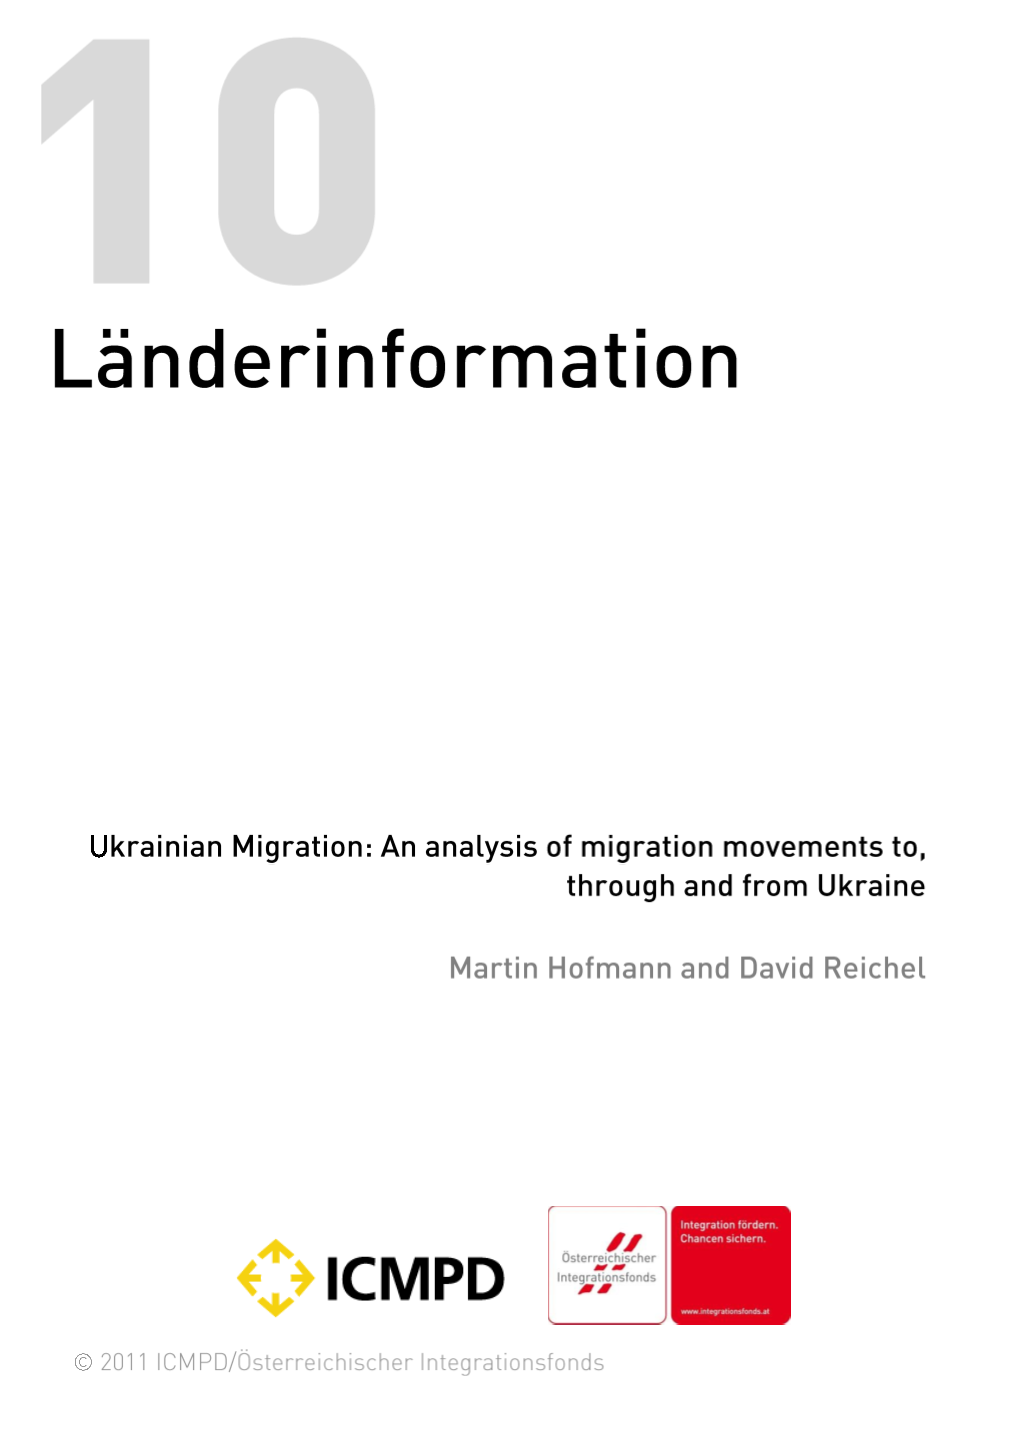 Ukrainian Migration: an Analysis of Migration Movements To, Through and from Ukraine